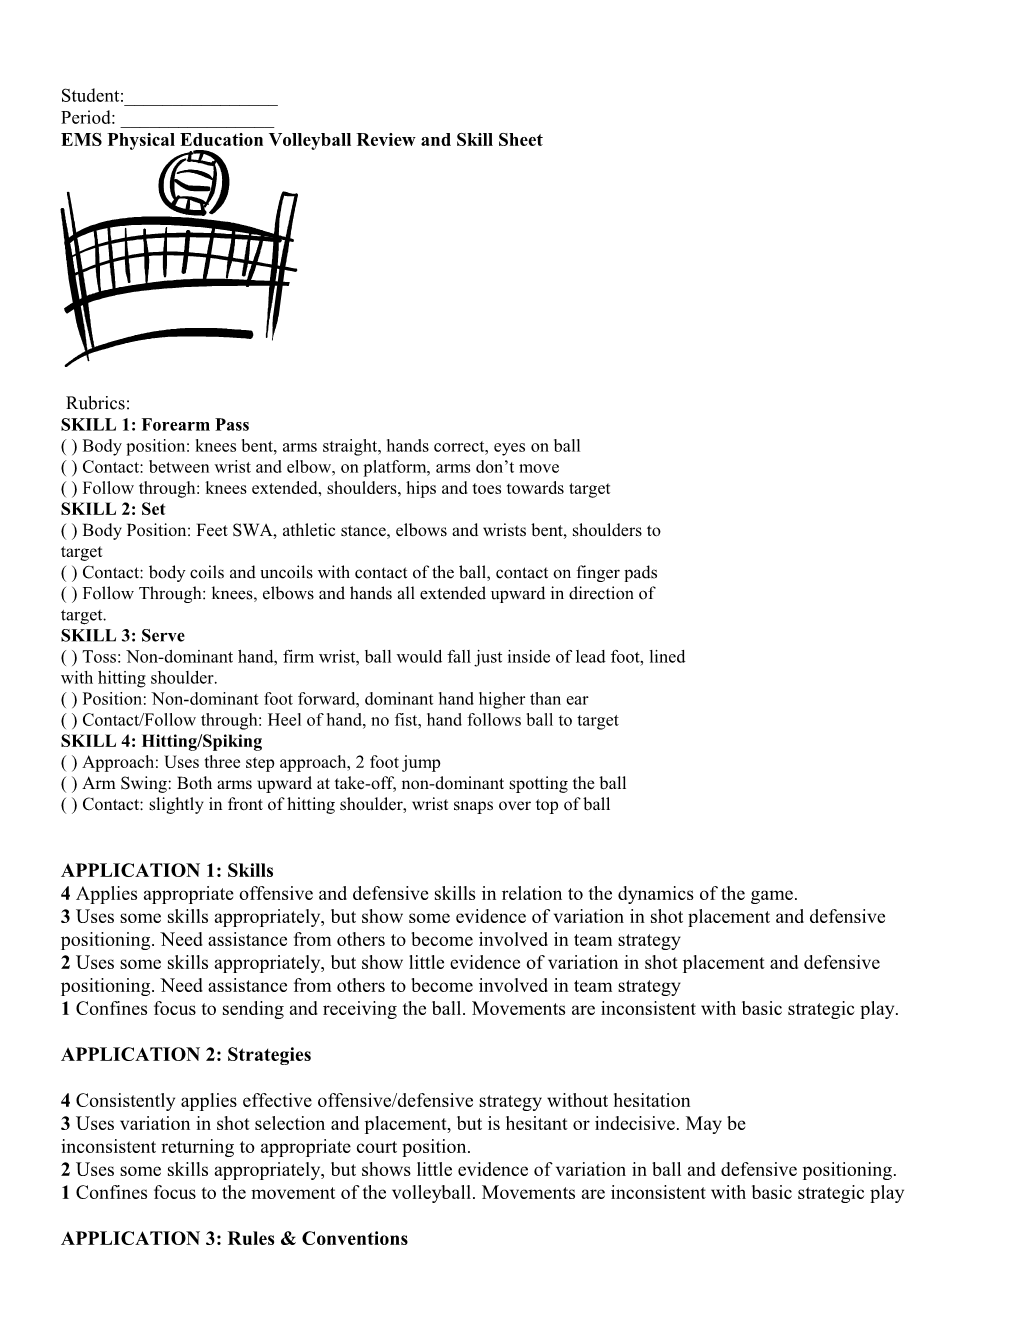 EMS Physical Education Volleyball Review and Skill Sheet